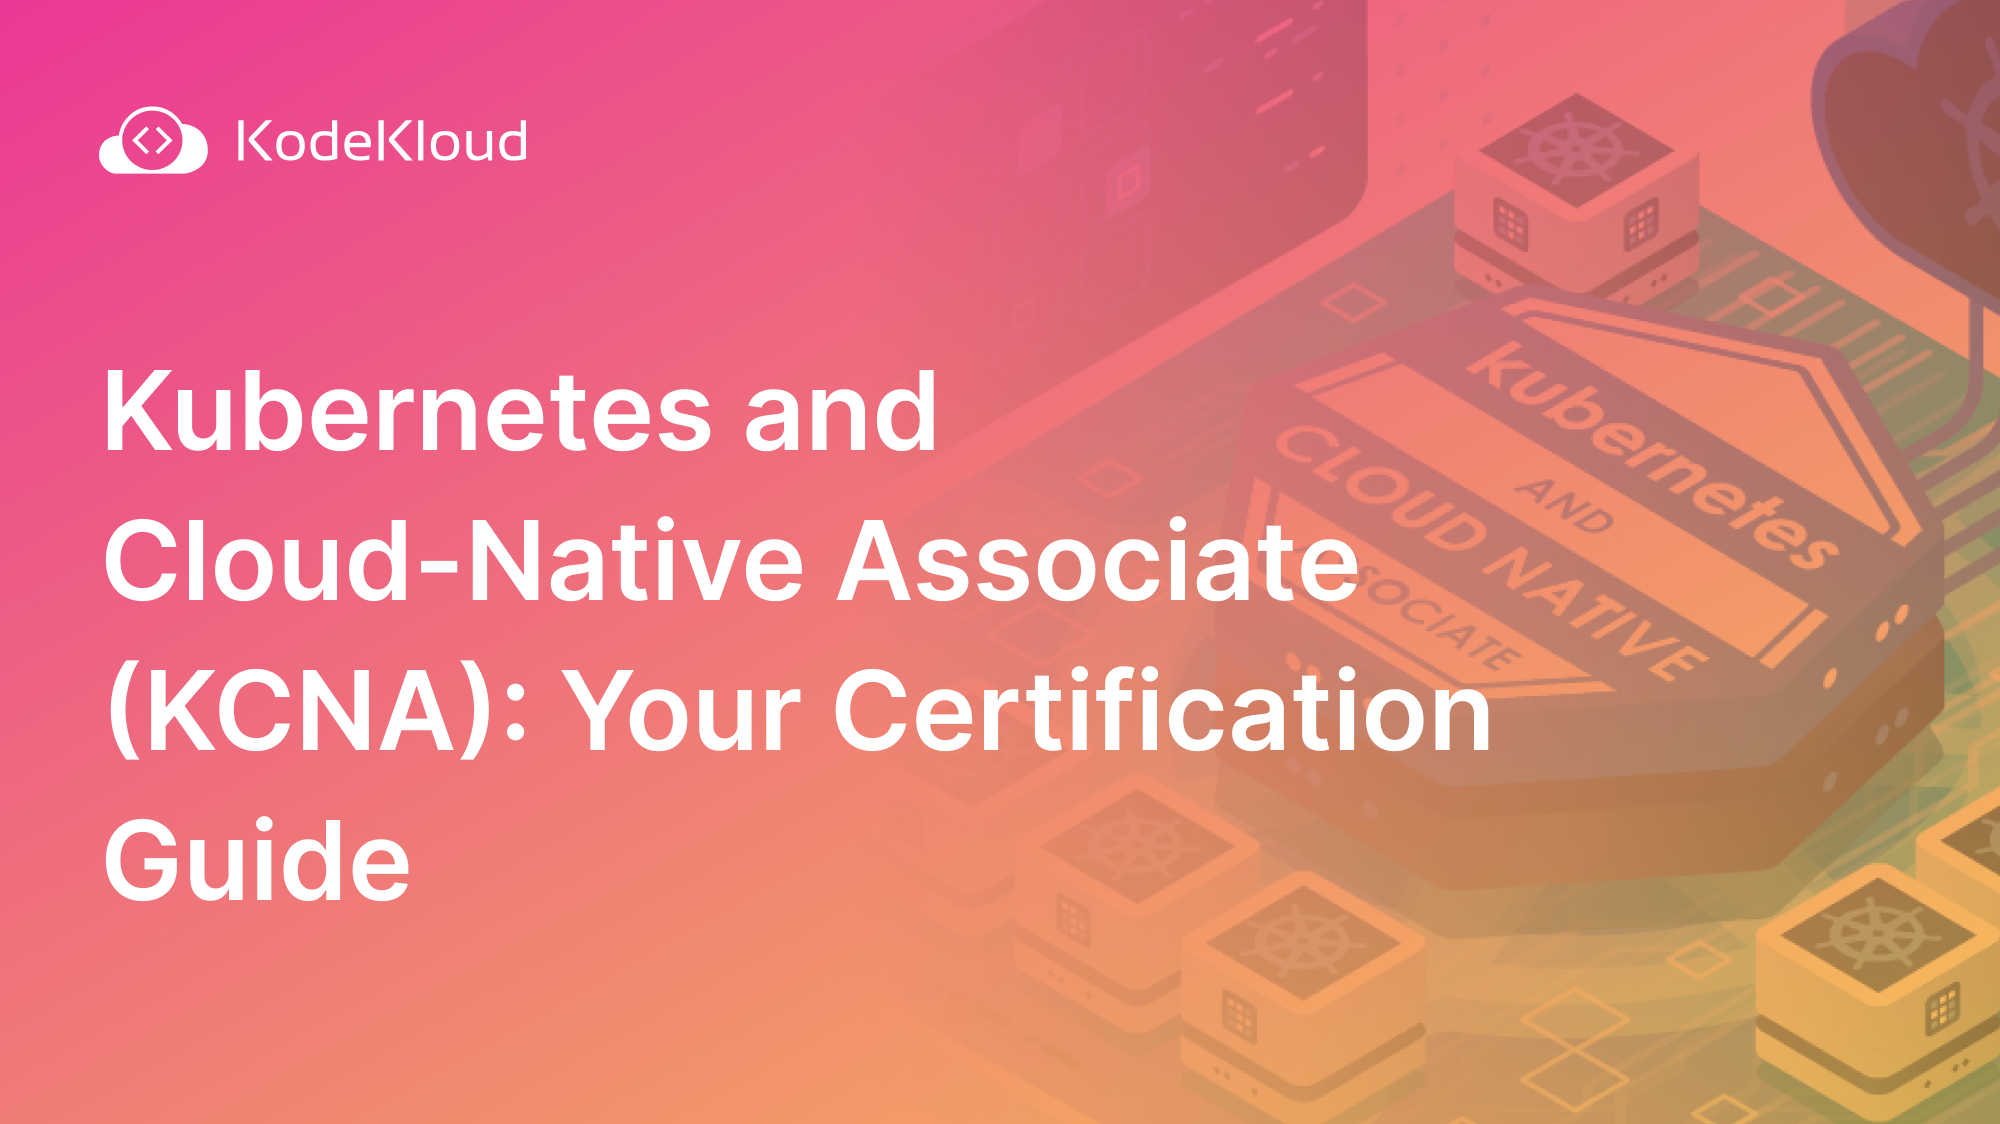 Kubernetes and Cloud-Native Associate (KCNA) Course: Your Certification Guide